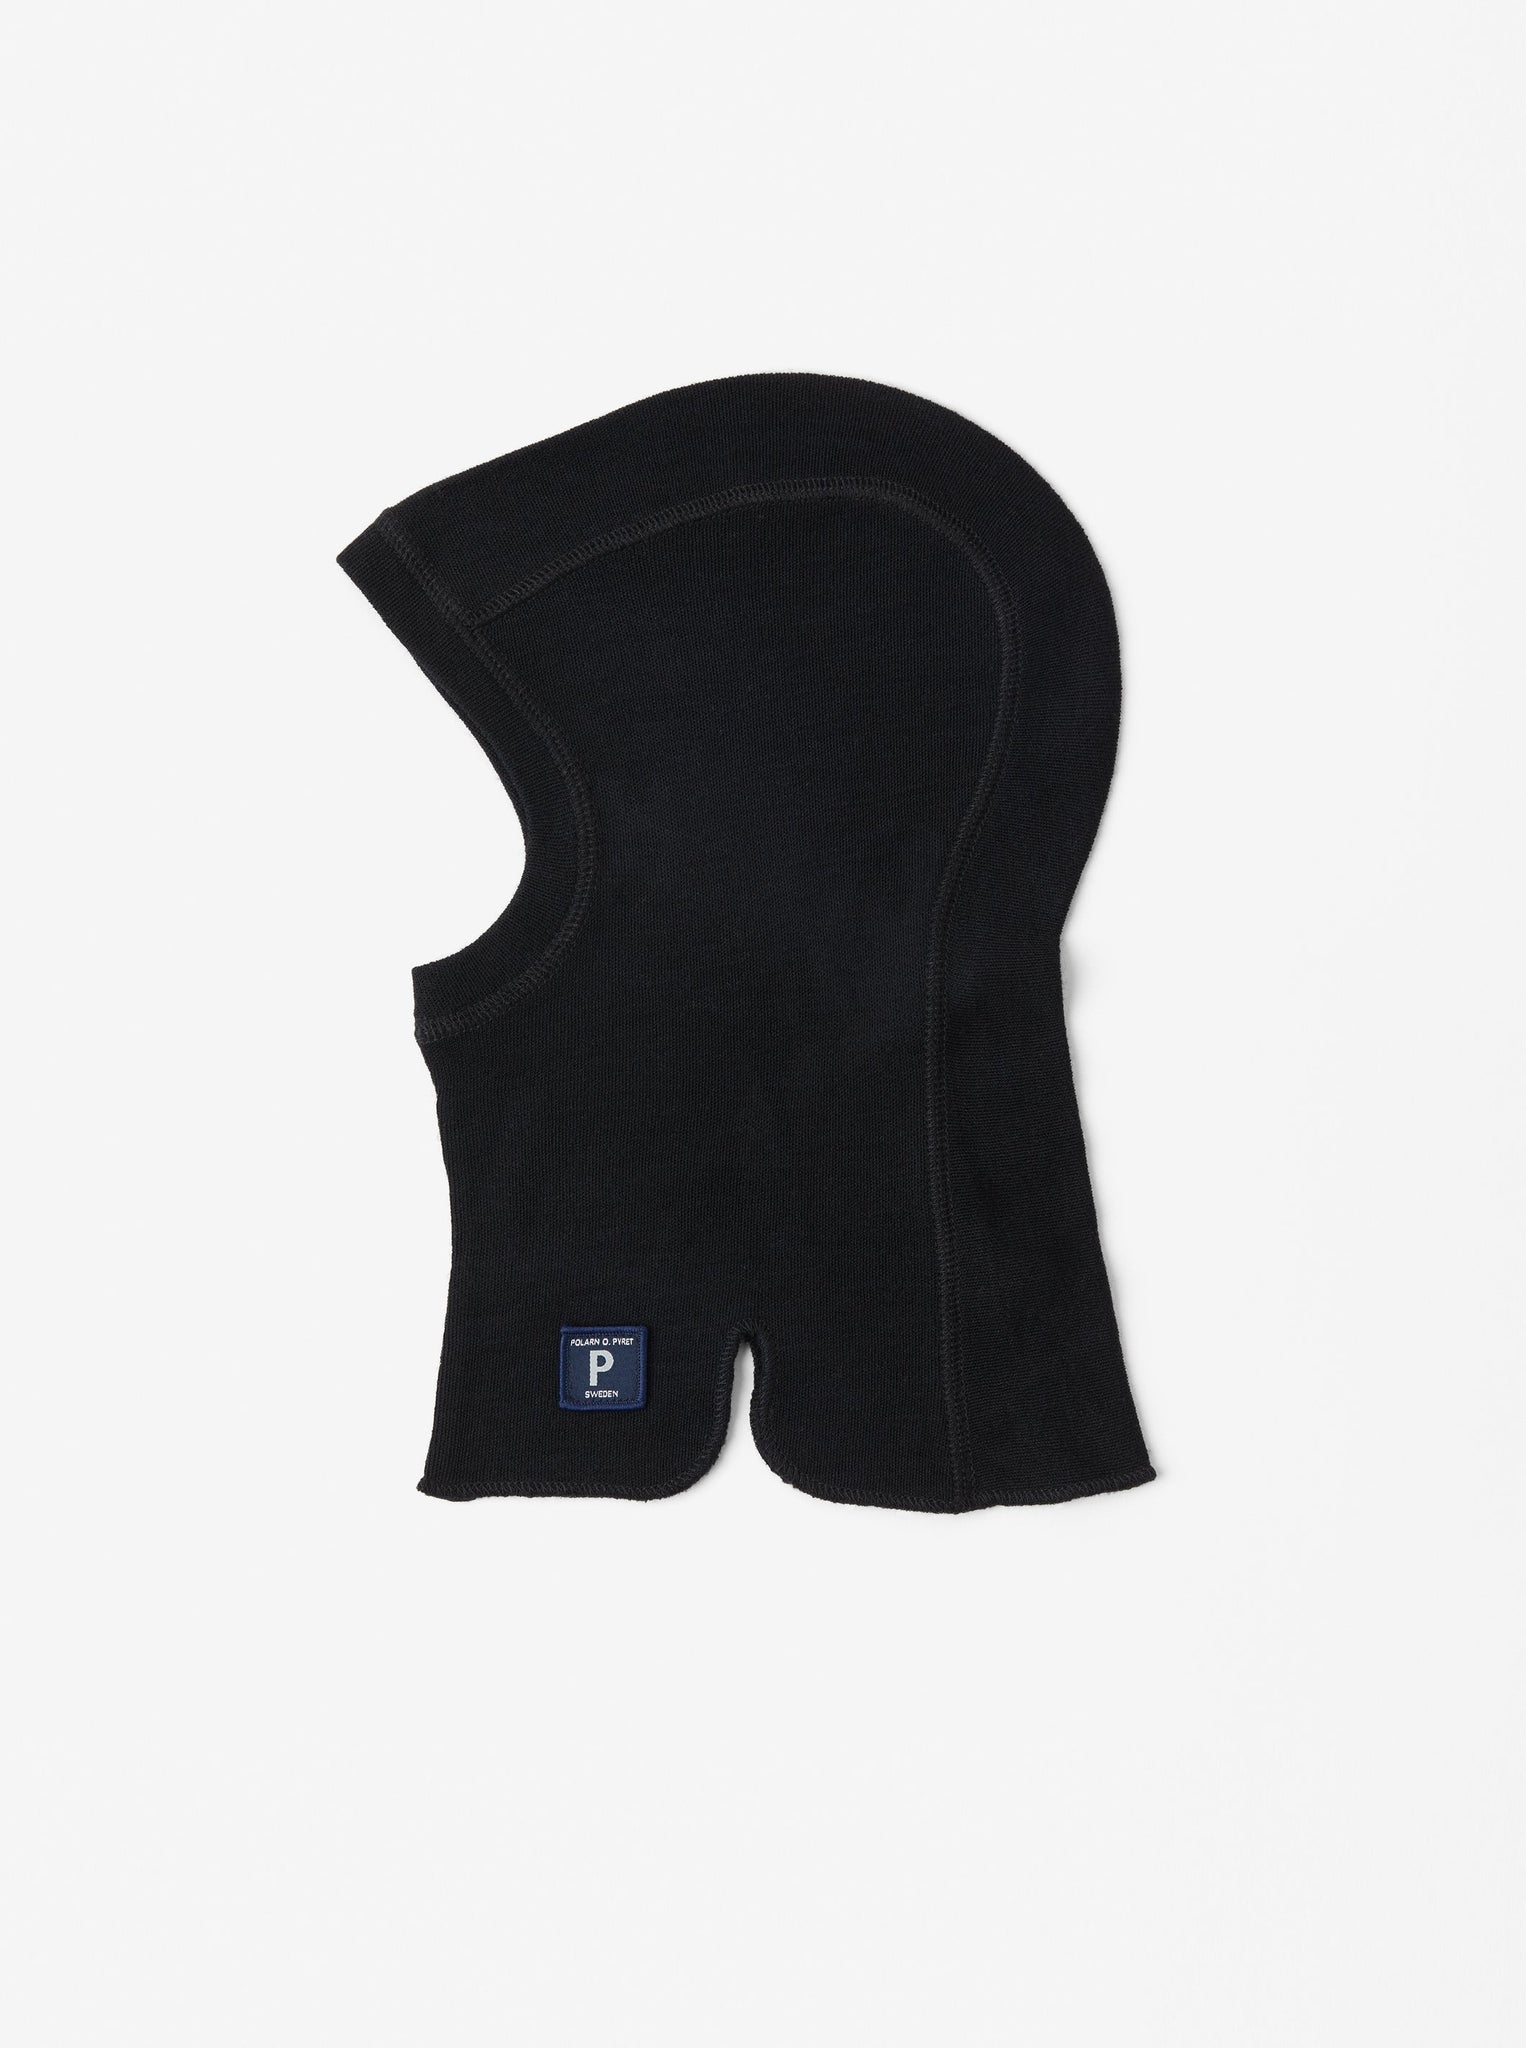 Merino Wool Kids Black Balaclava from the Polarn O. Pyret kidswear collection. Quality kids clothing made to last.